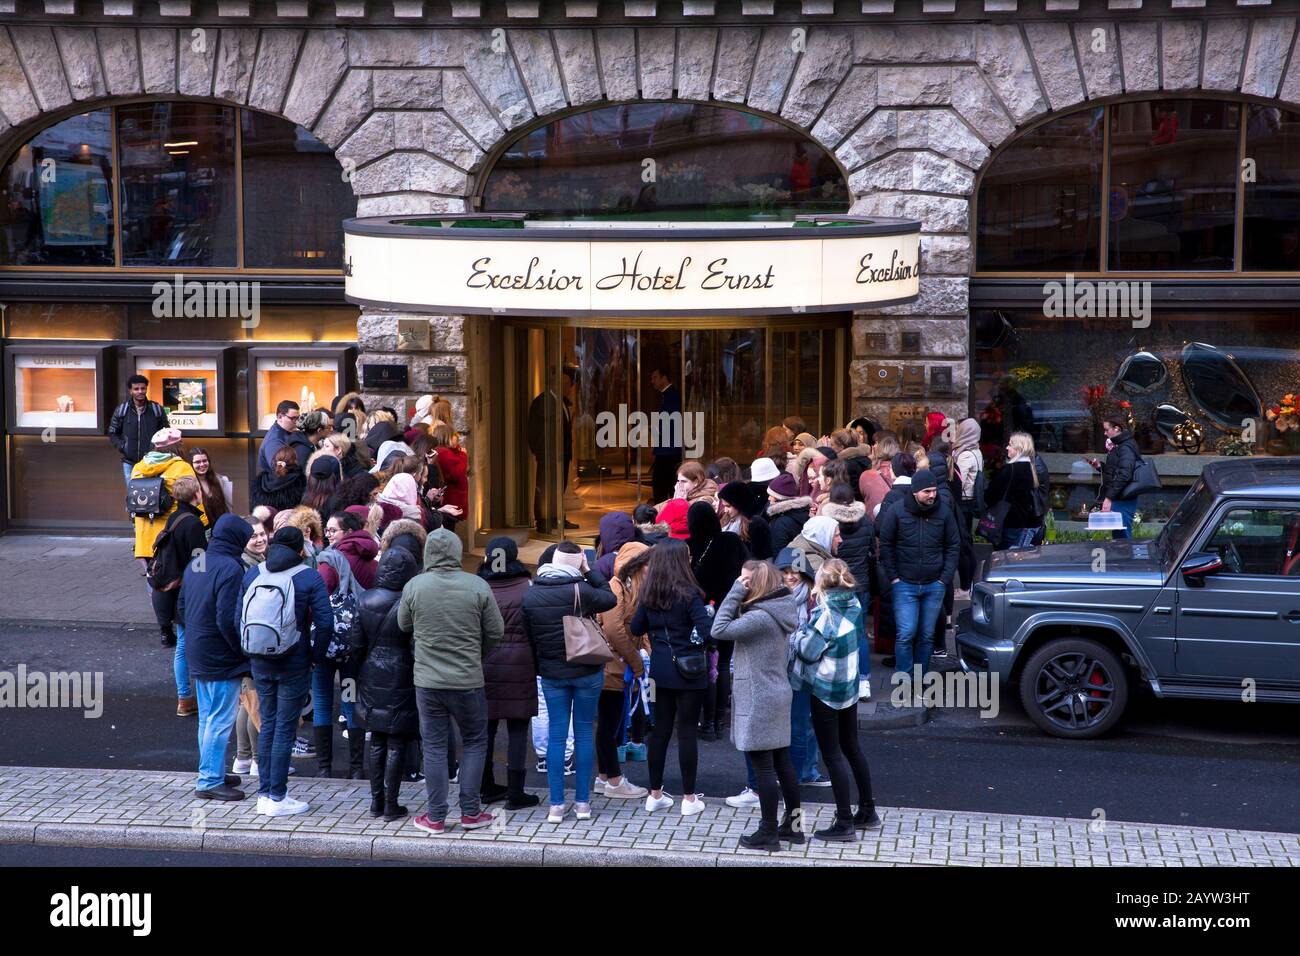 fans of the band Jonas Brothers wait in front of the Excelsior Hotel Ernst, Cologne, Germany  Fans der Band Jonas Brothers warten vor dem Excelsior Ho Stock Photo